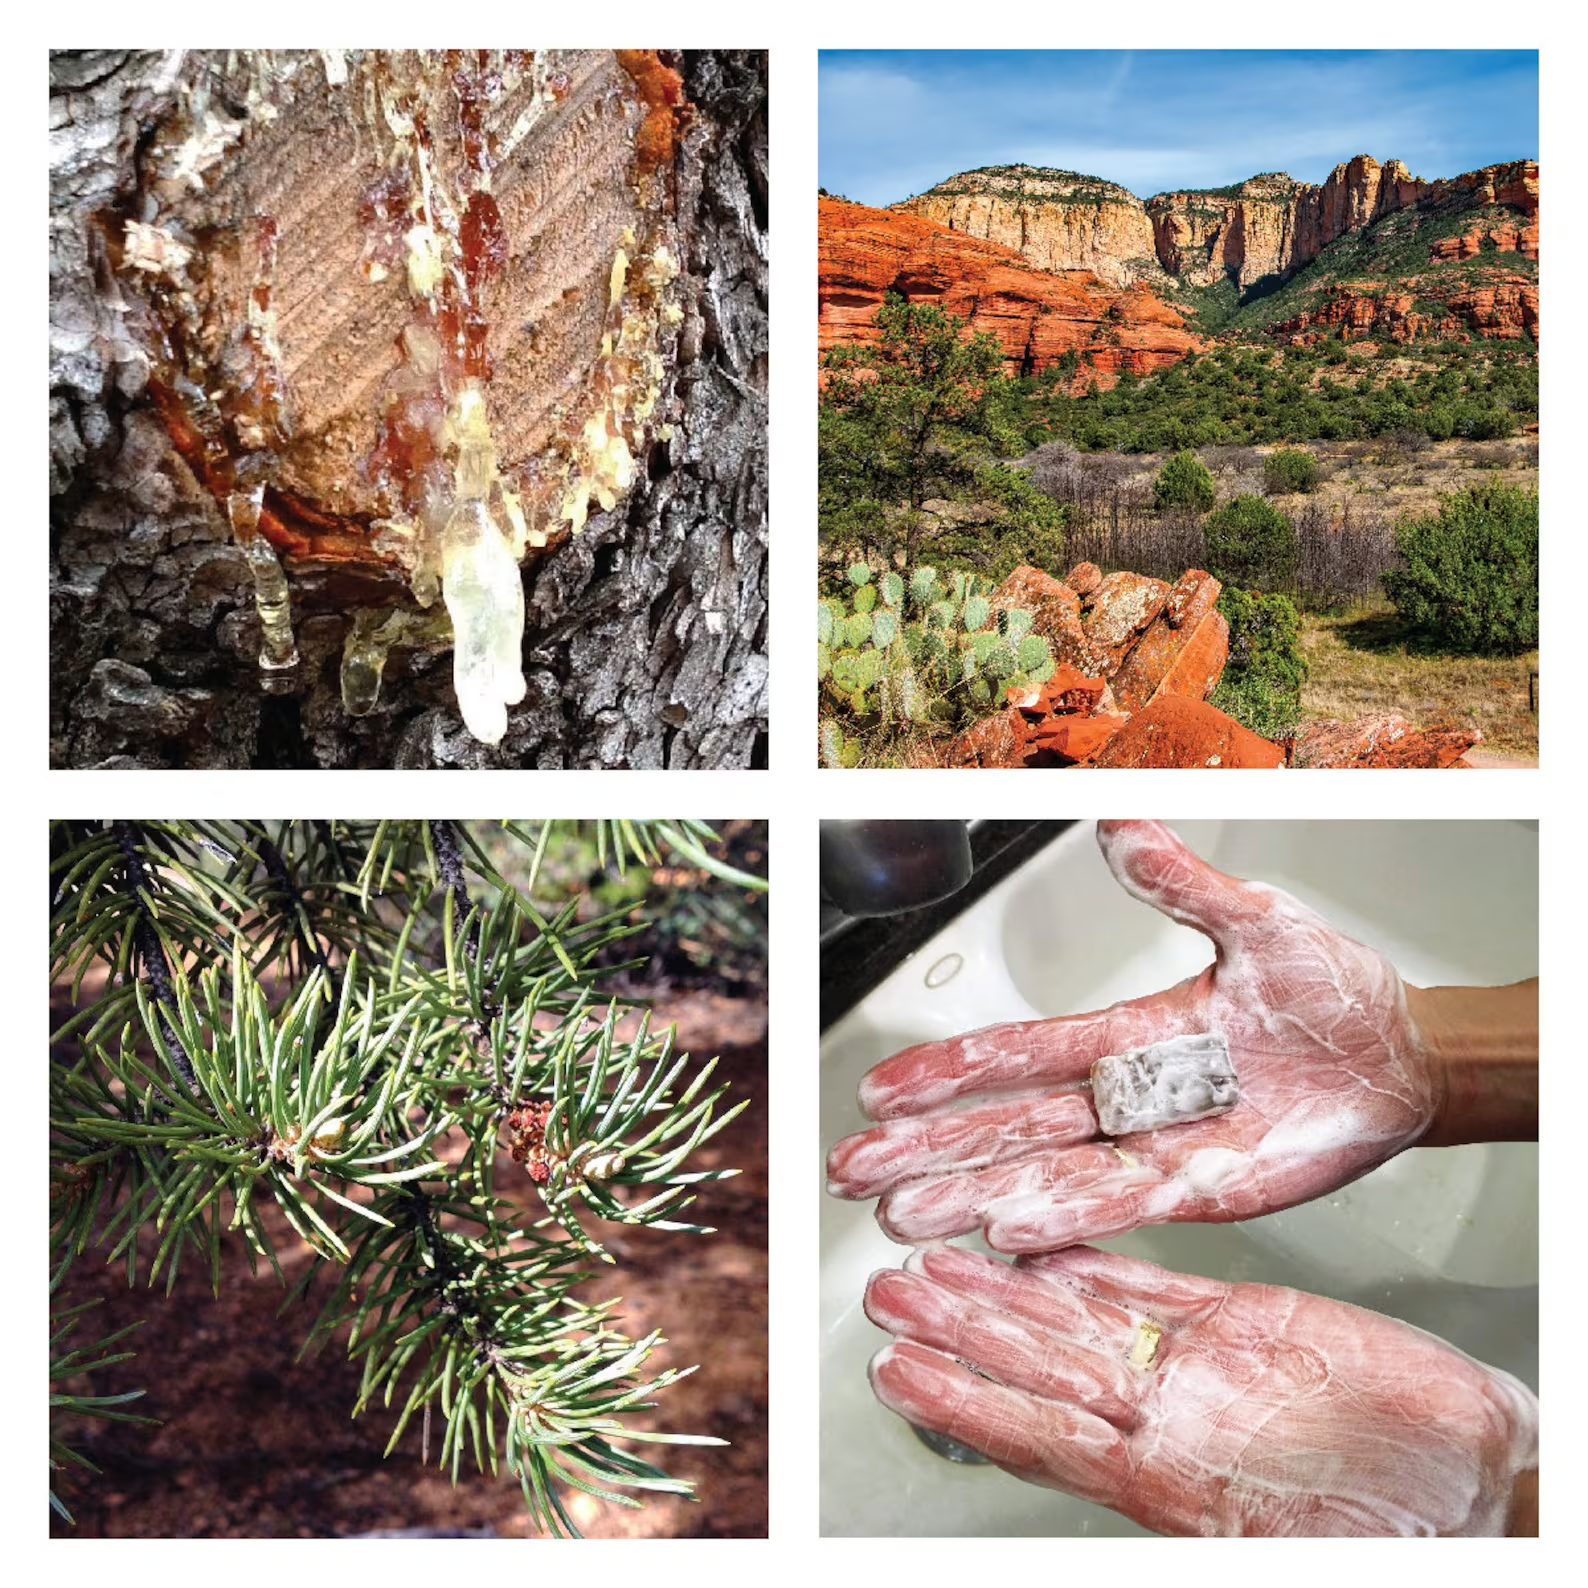 Showing_4_pictures_collage_washing_hands_pine_extracting_from_tree_arizona